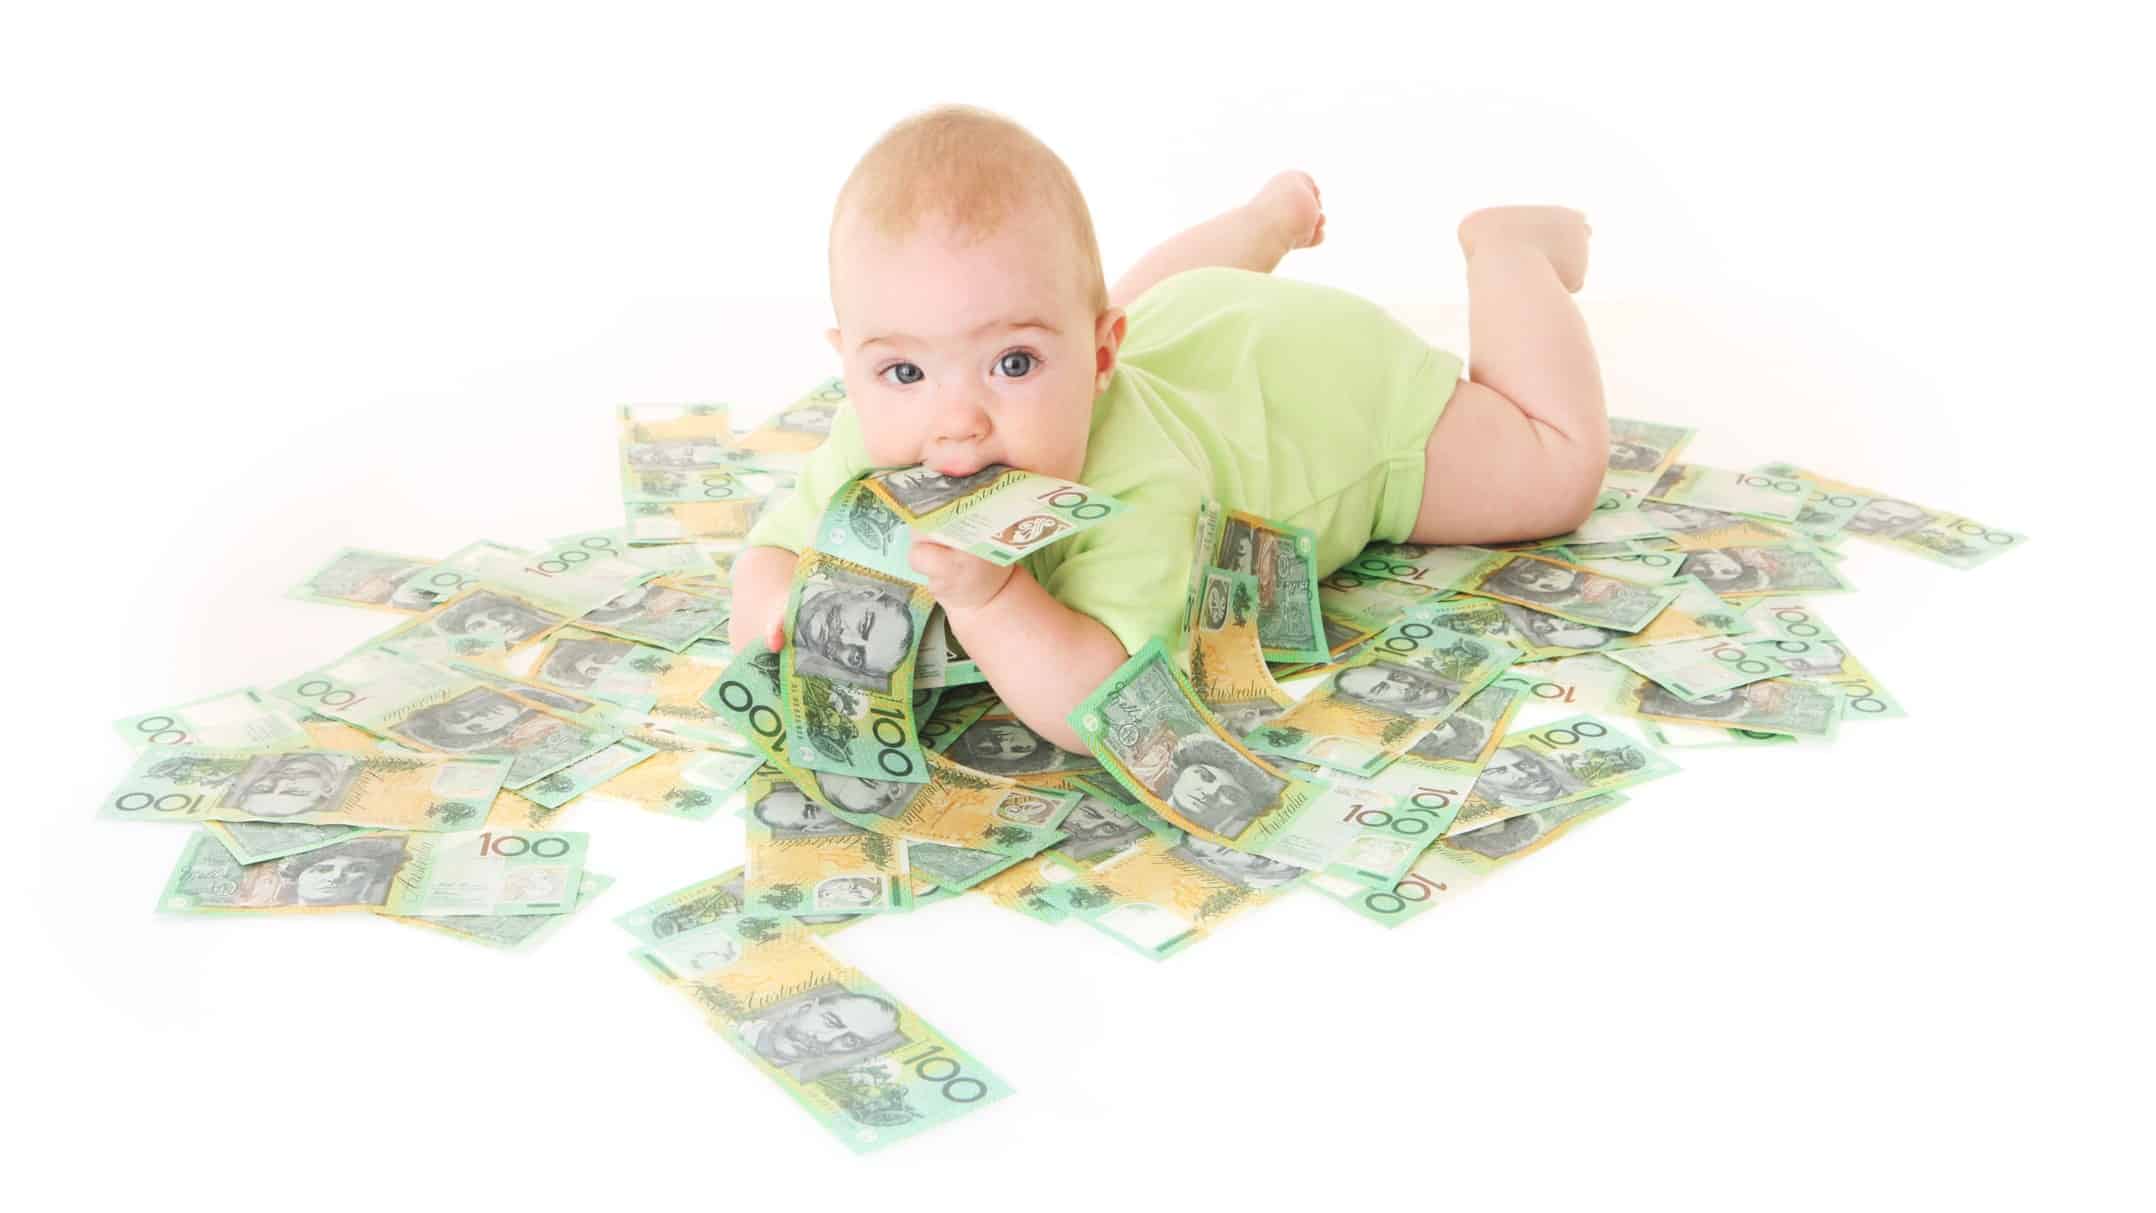 A baby lying on a pile of one hundred dollar notes